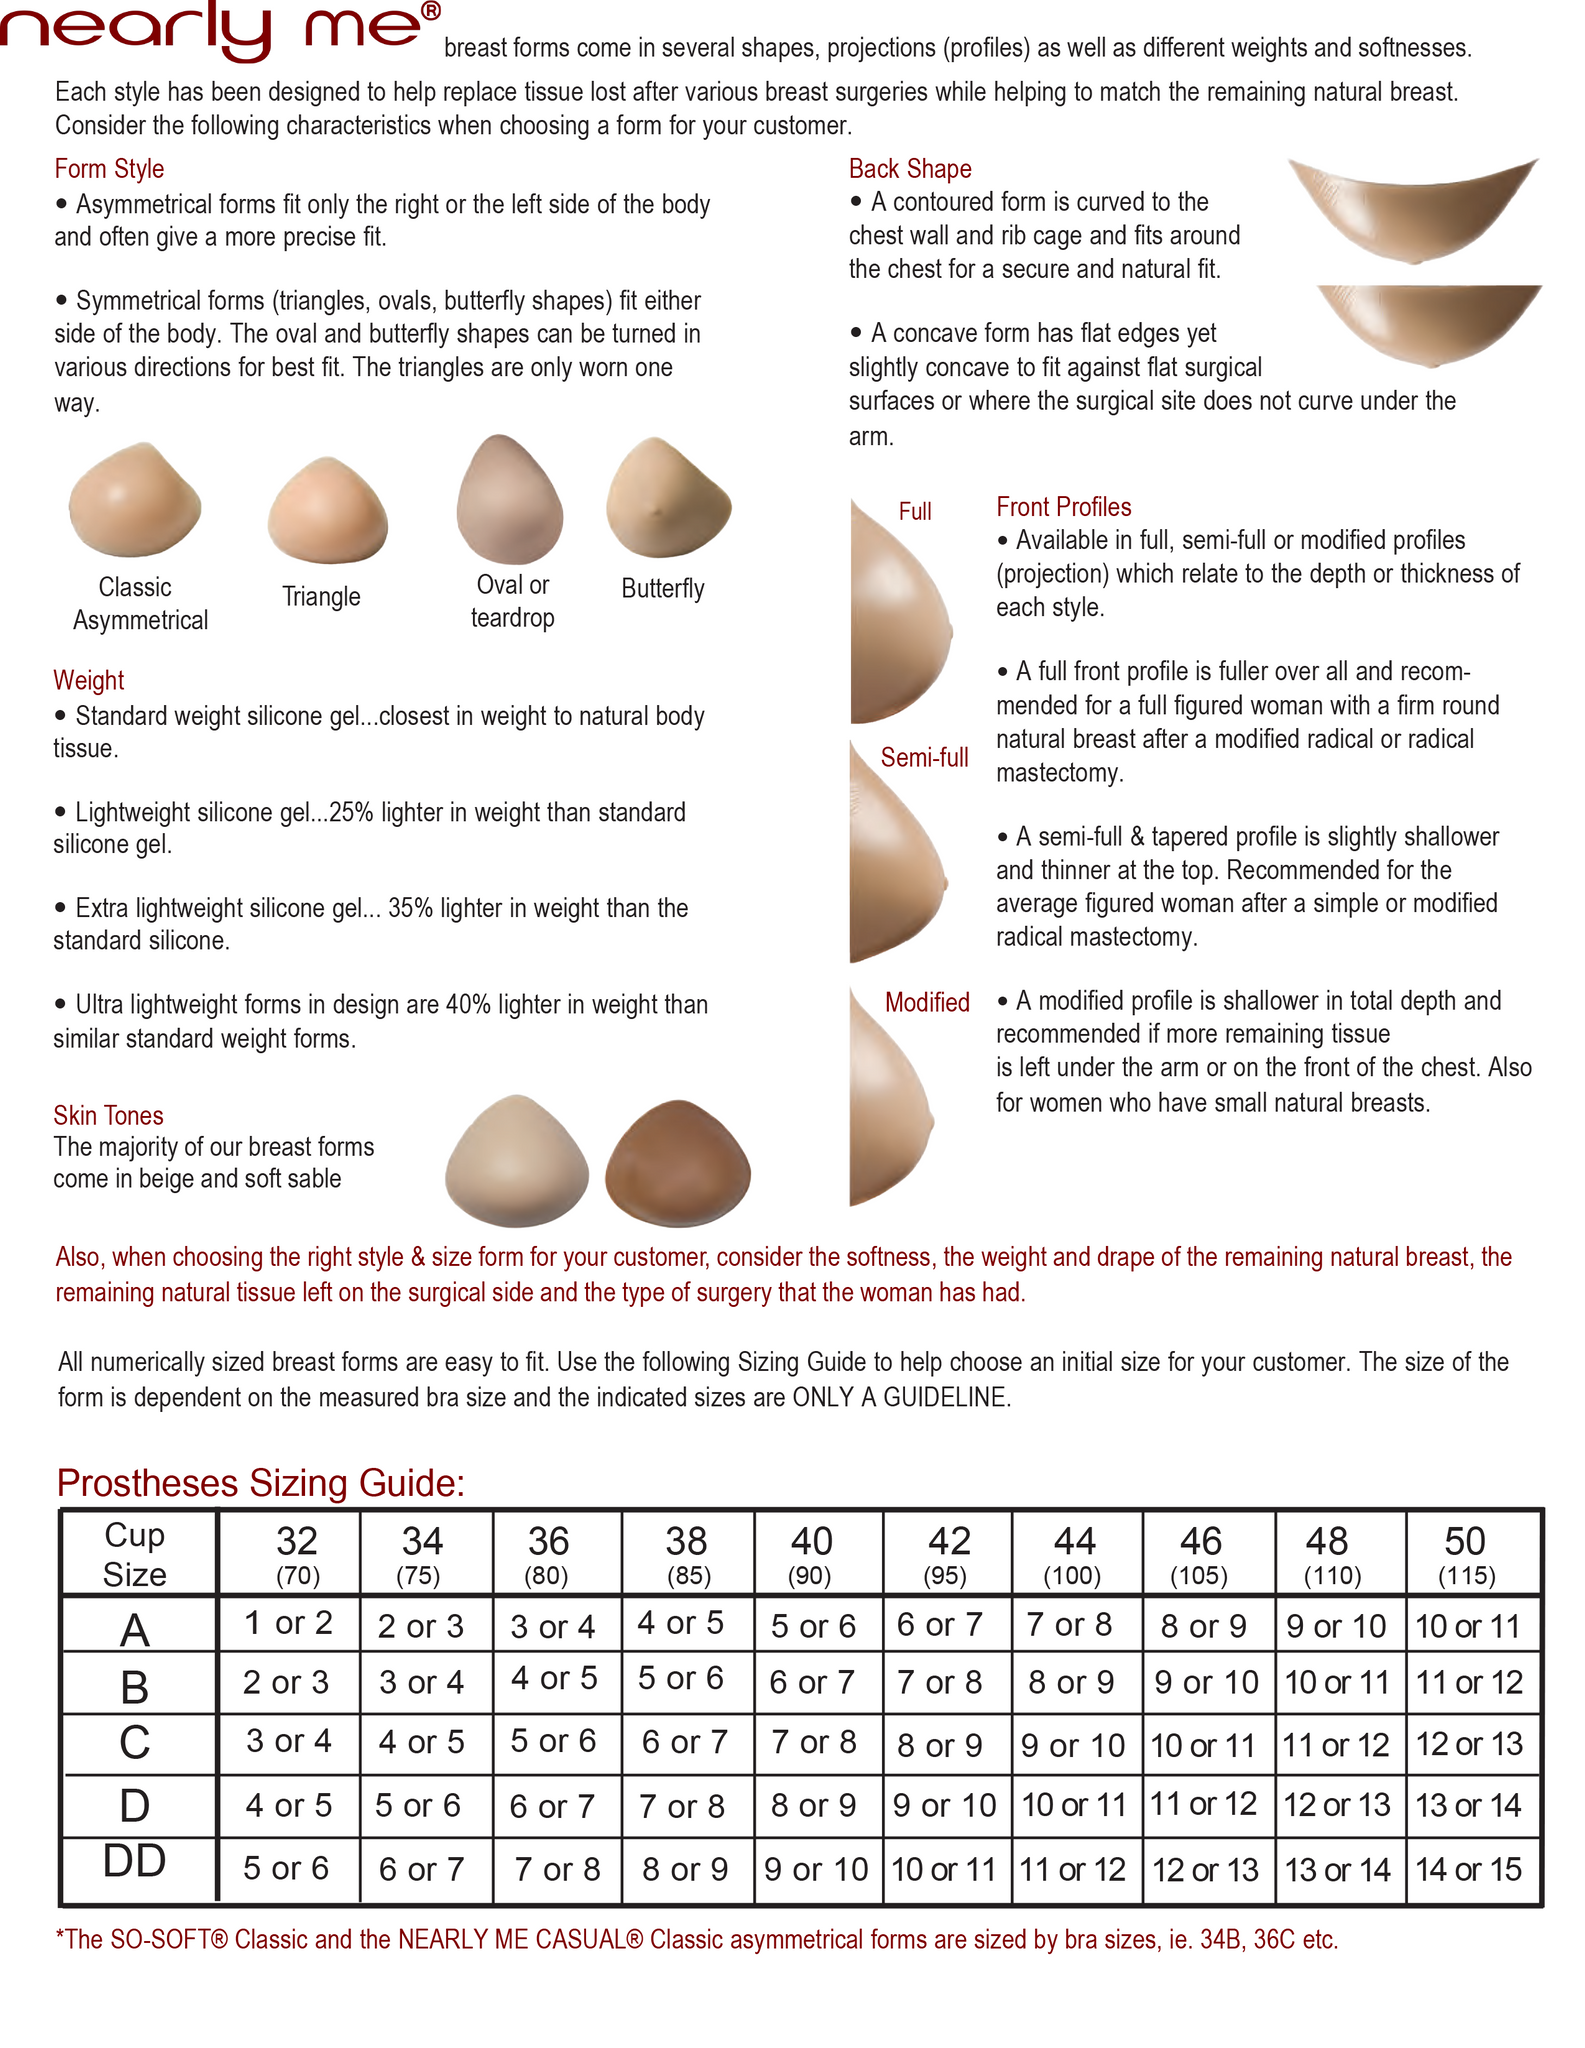 Nearly Me Prosthesis Sizing Guide